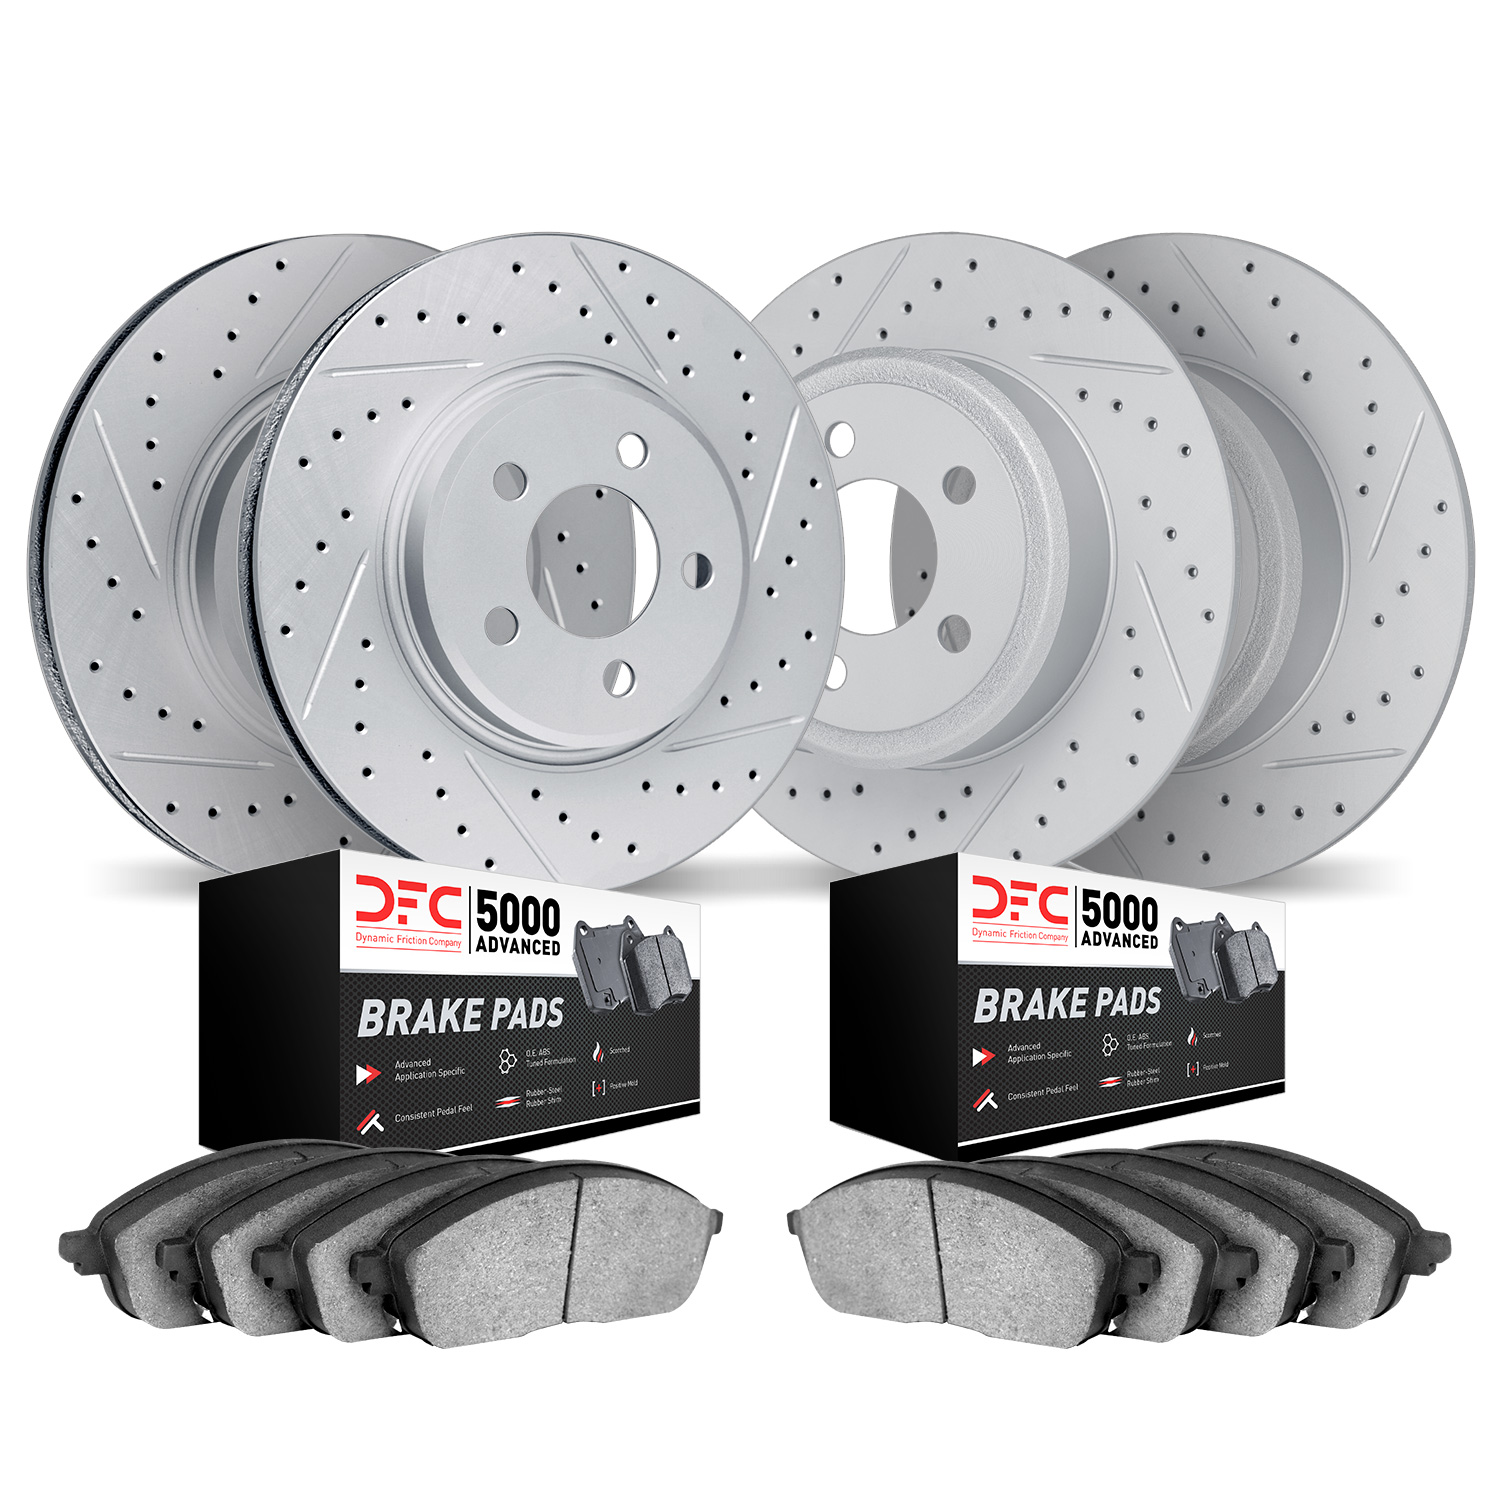 2504-74019 Geoperformance Drilled/Slotted Rotors w/5000 Advanced Brake Pads Kit, 2008-2015 Audi/Volkswagen, Position: Front and